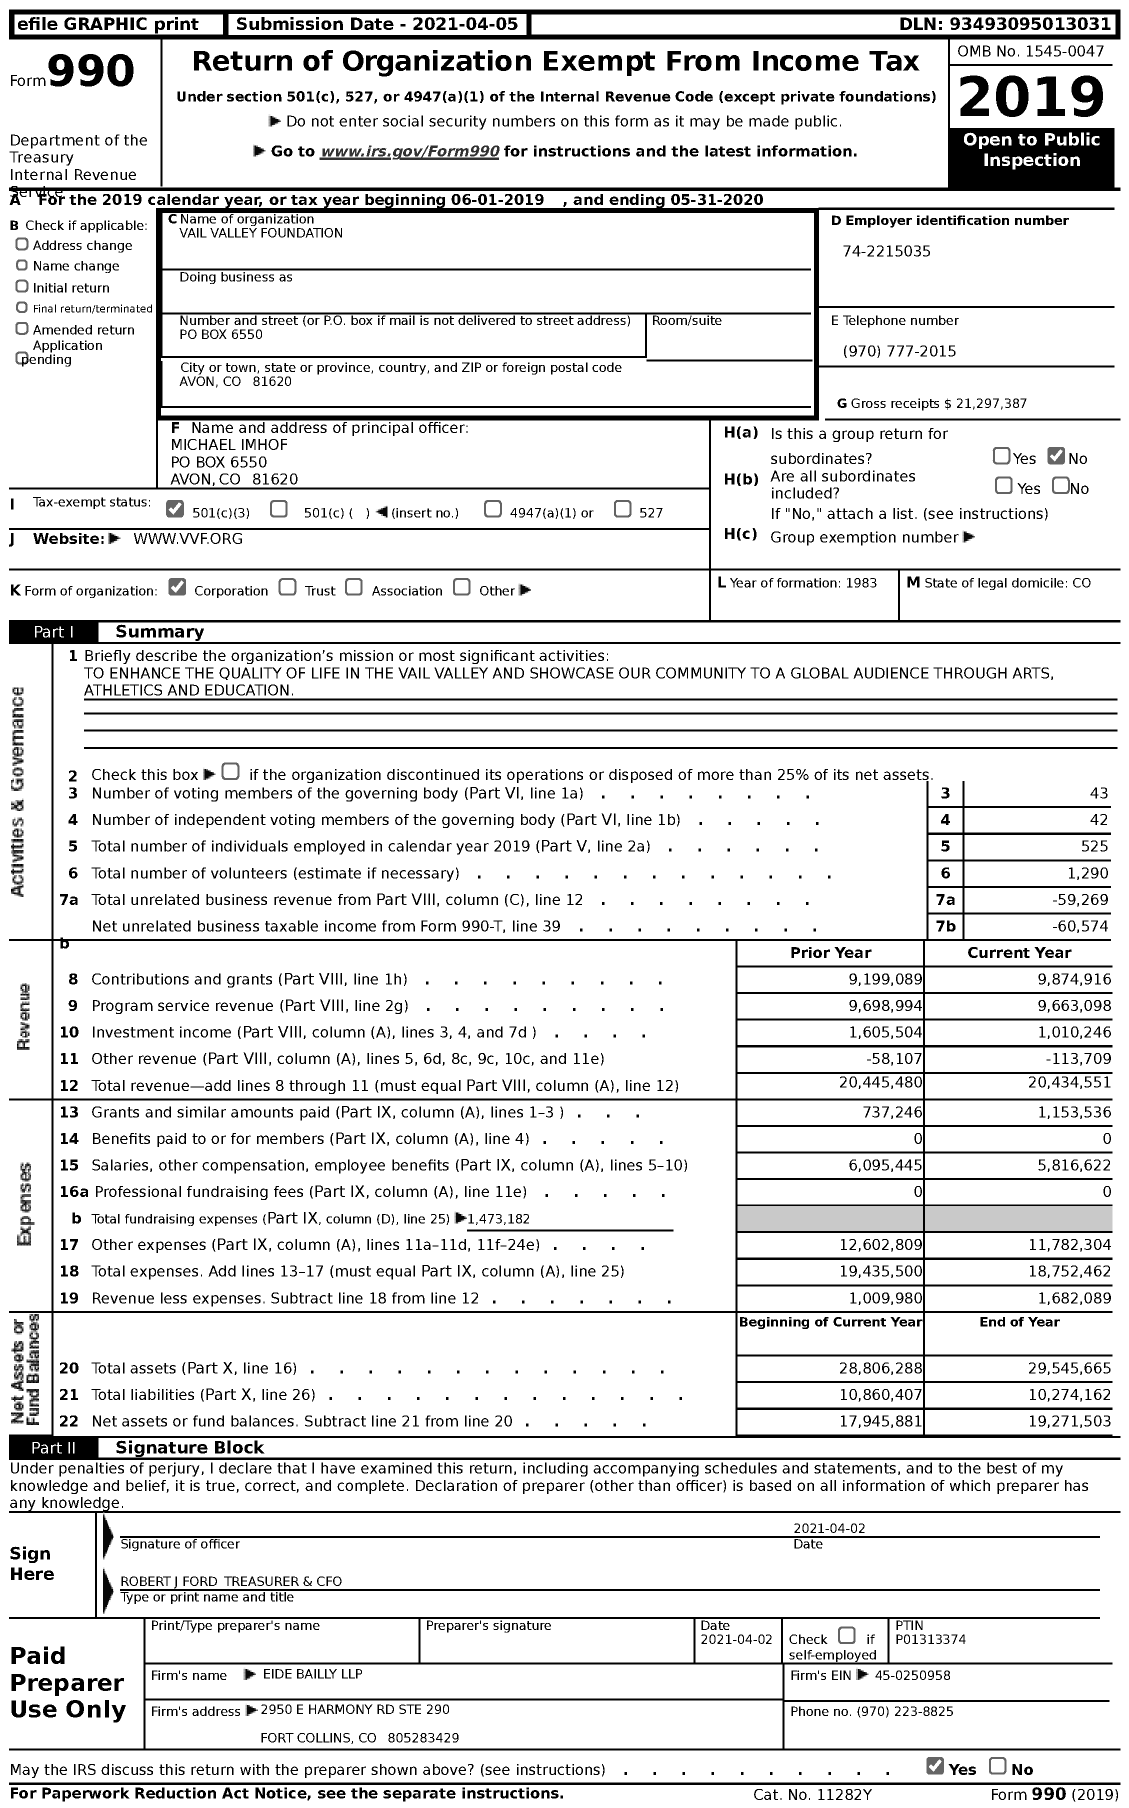 Image of first page of 2019 Form 990 for Vail Valley Foundation (VVF)